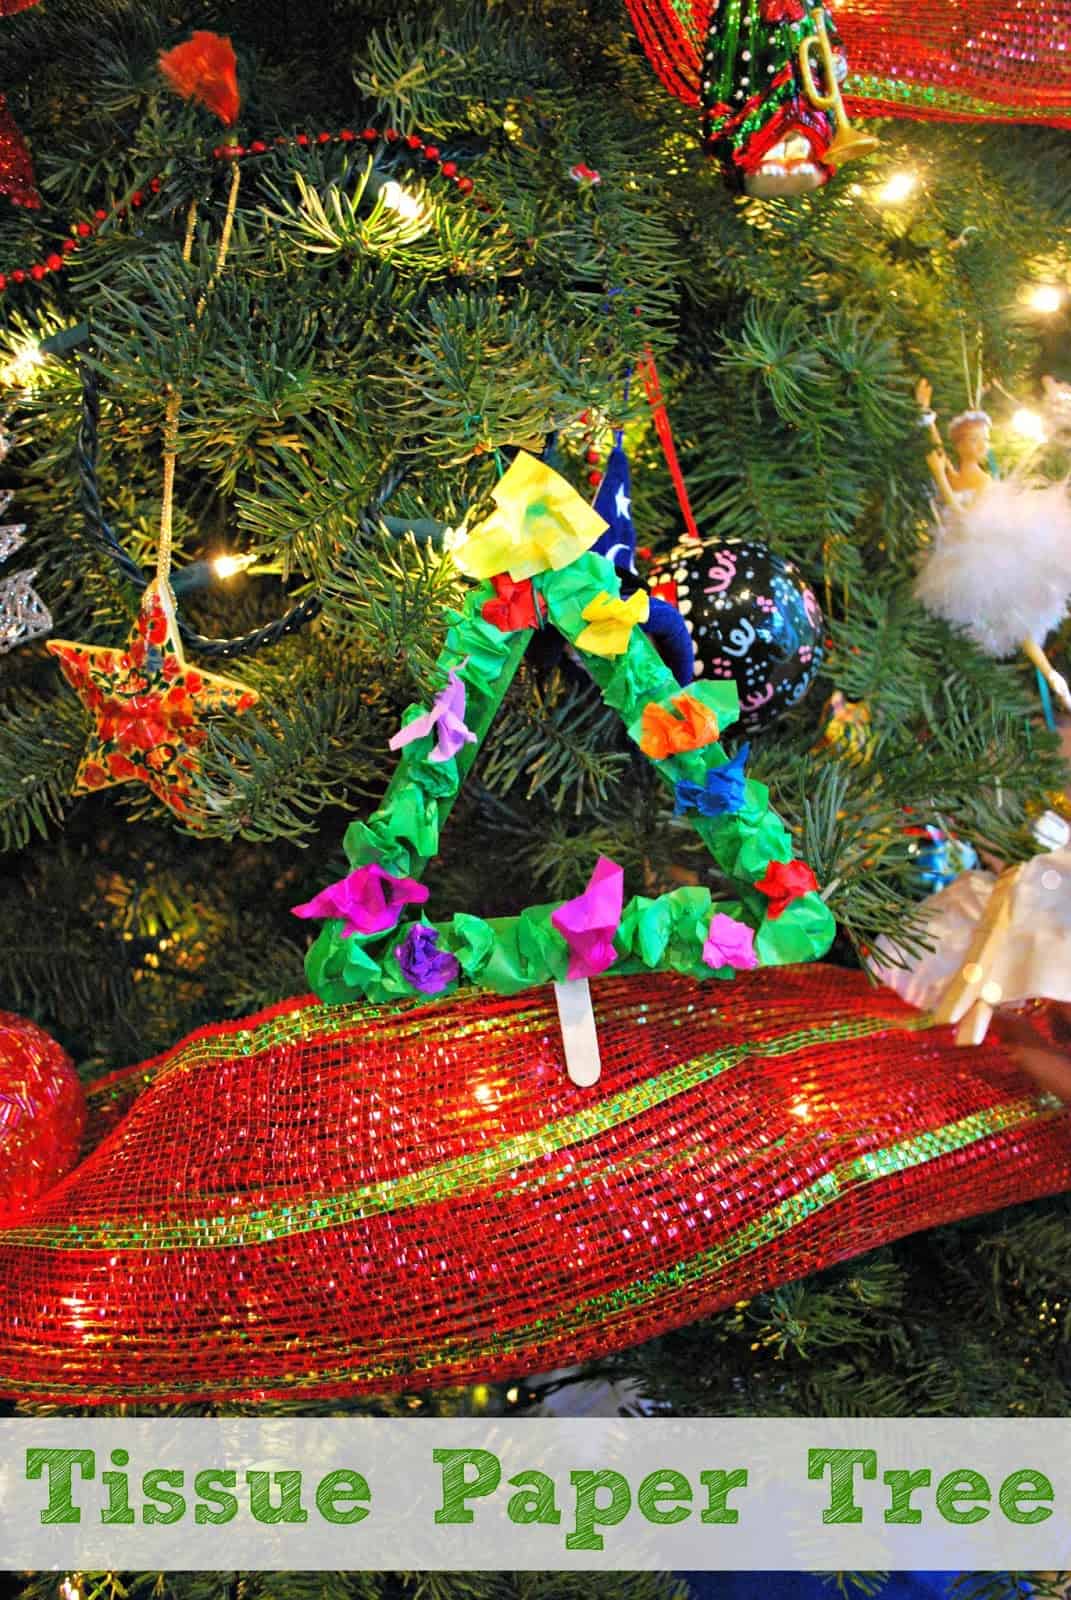 Making Tissue paper Tree Ornaments - Easy to make using tissue paper and popsicle sticks. 